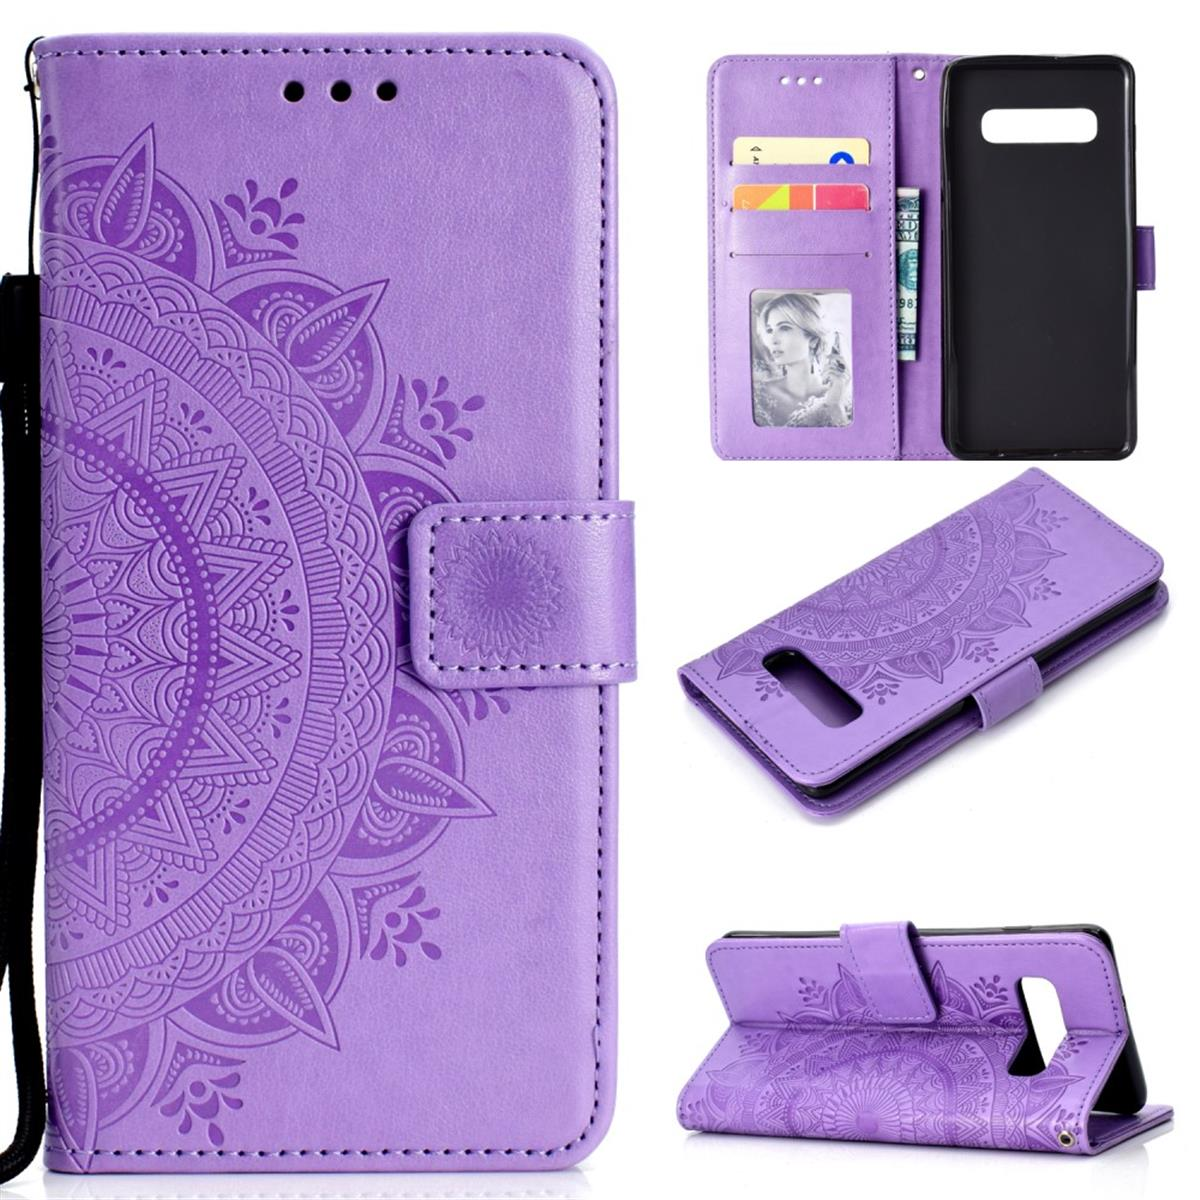 COVERKINGZ Klapphülle mit Mandala Muster, S10, Galaxy Lila Bookcover, Samsung